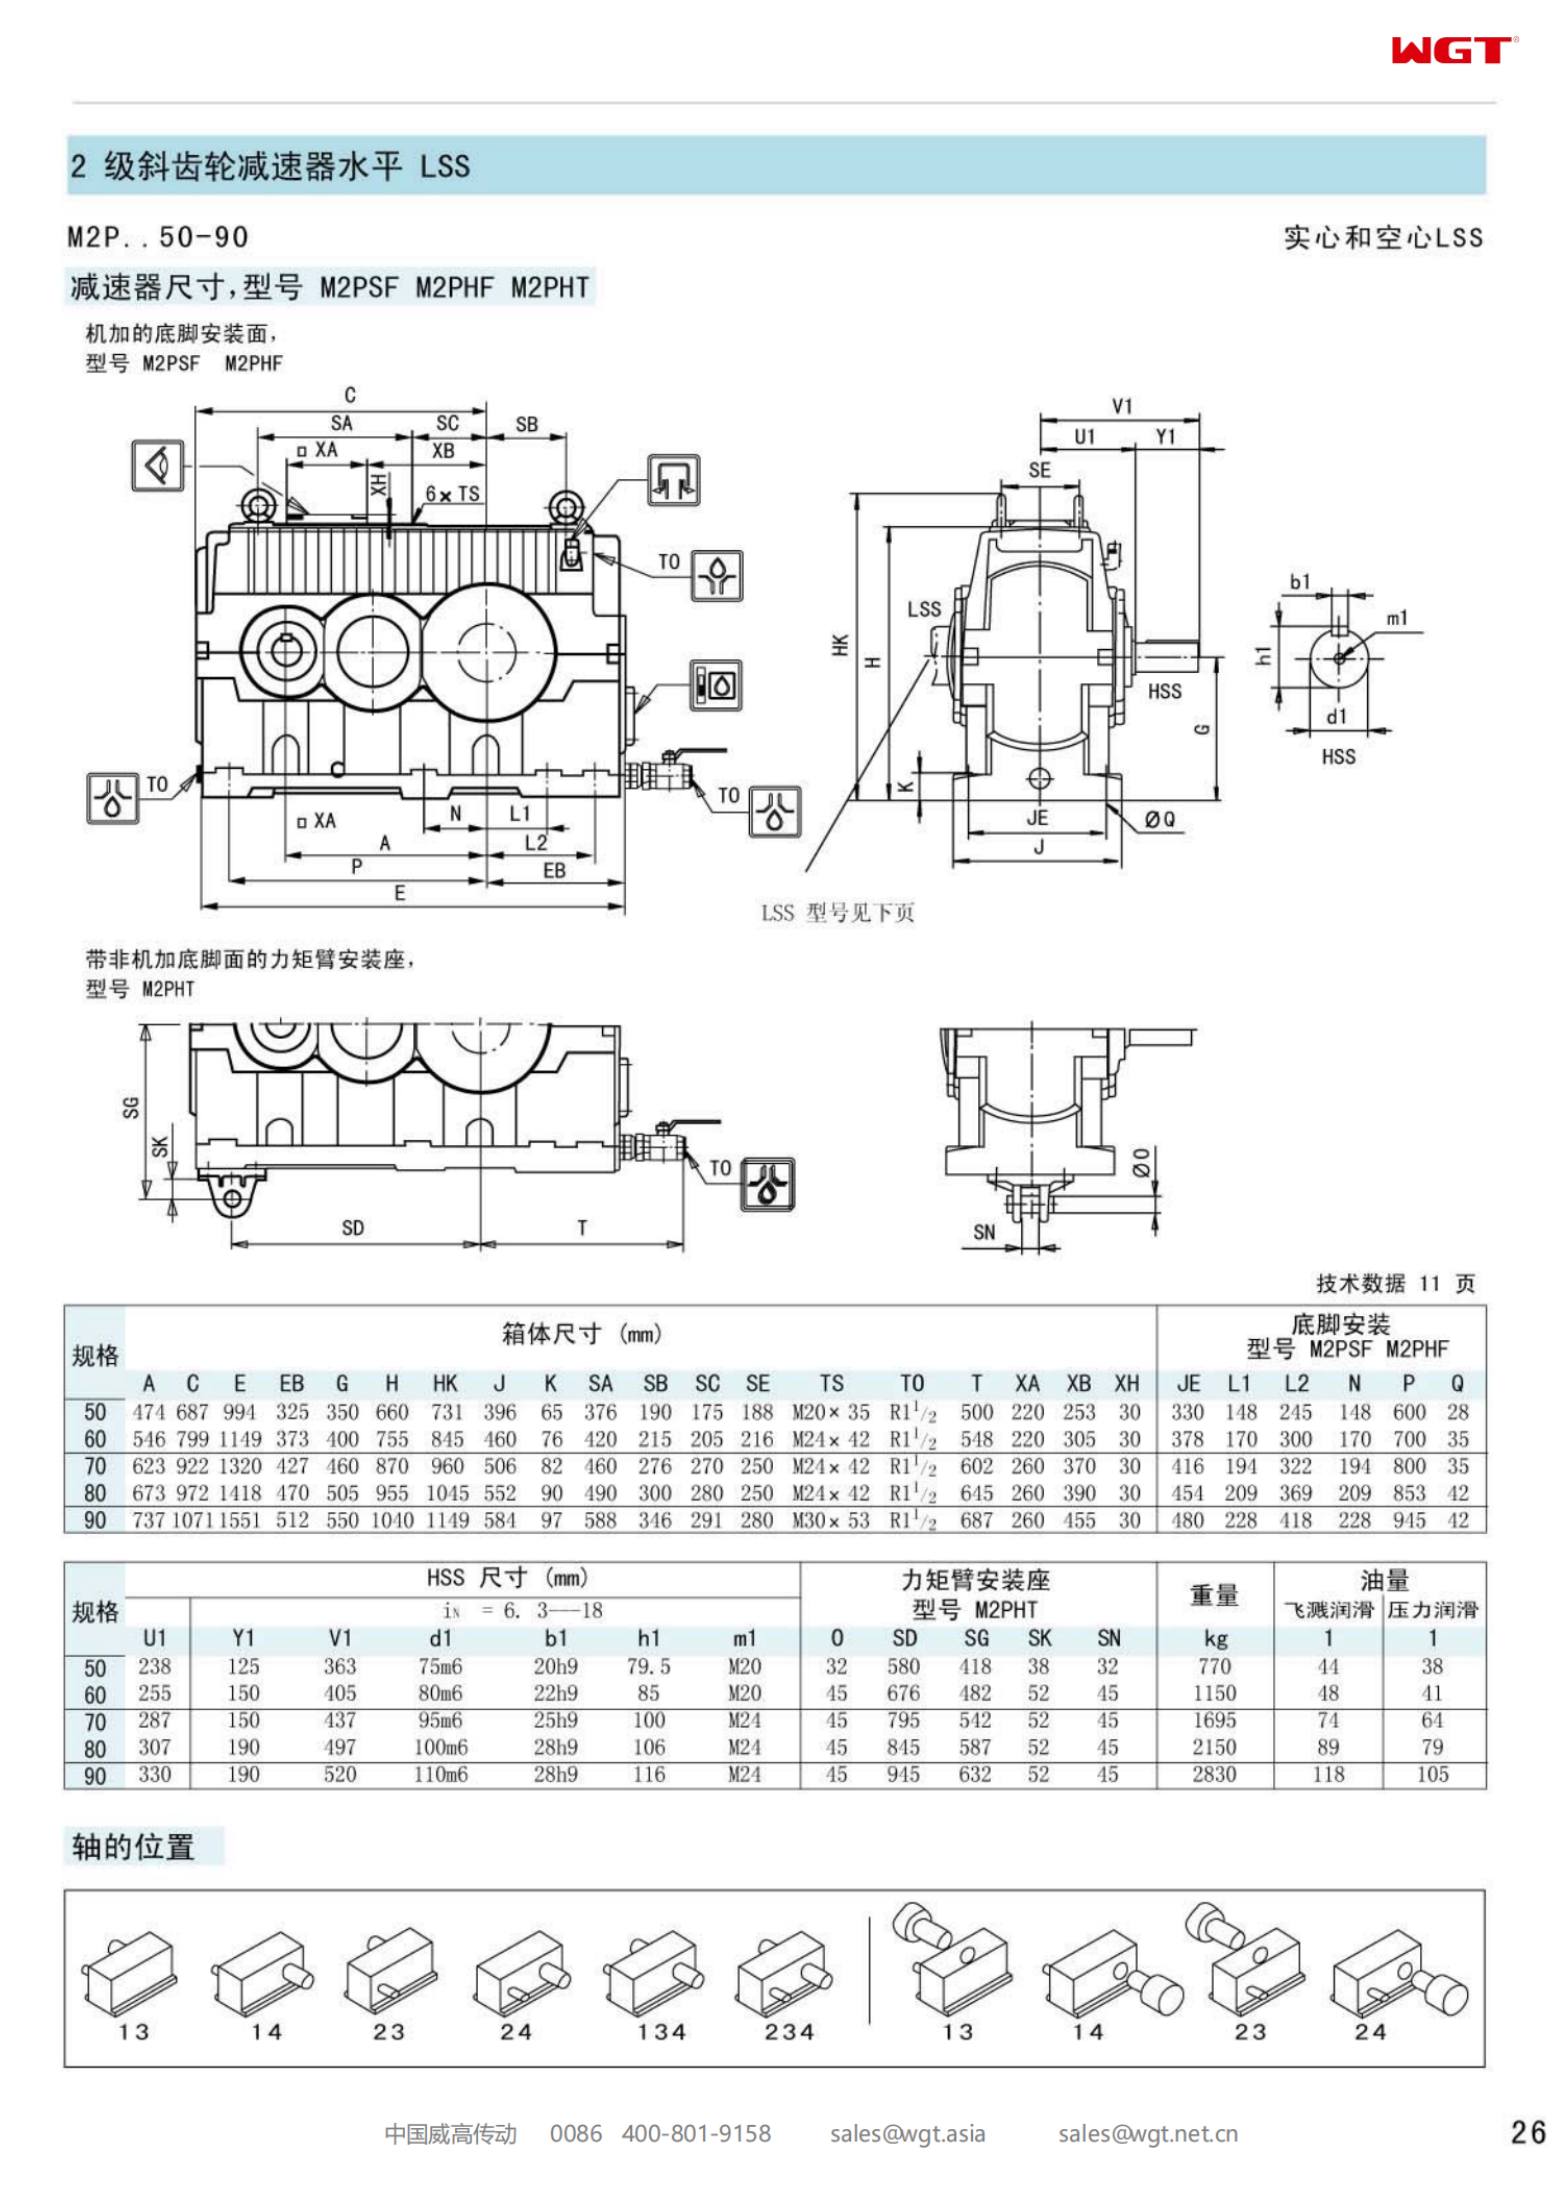 M2PHT70 Replace_SEW_M_Series Gearbox